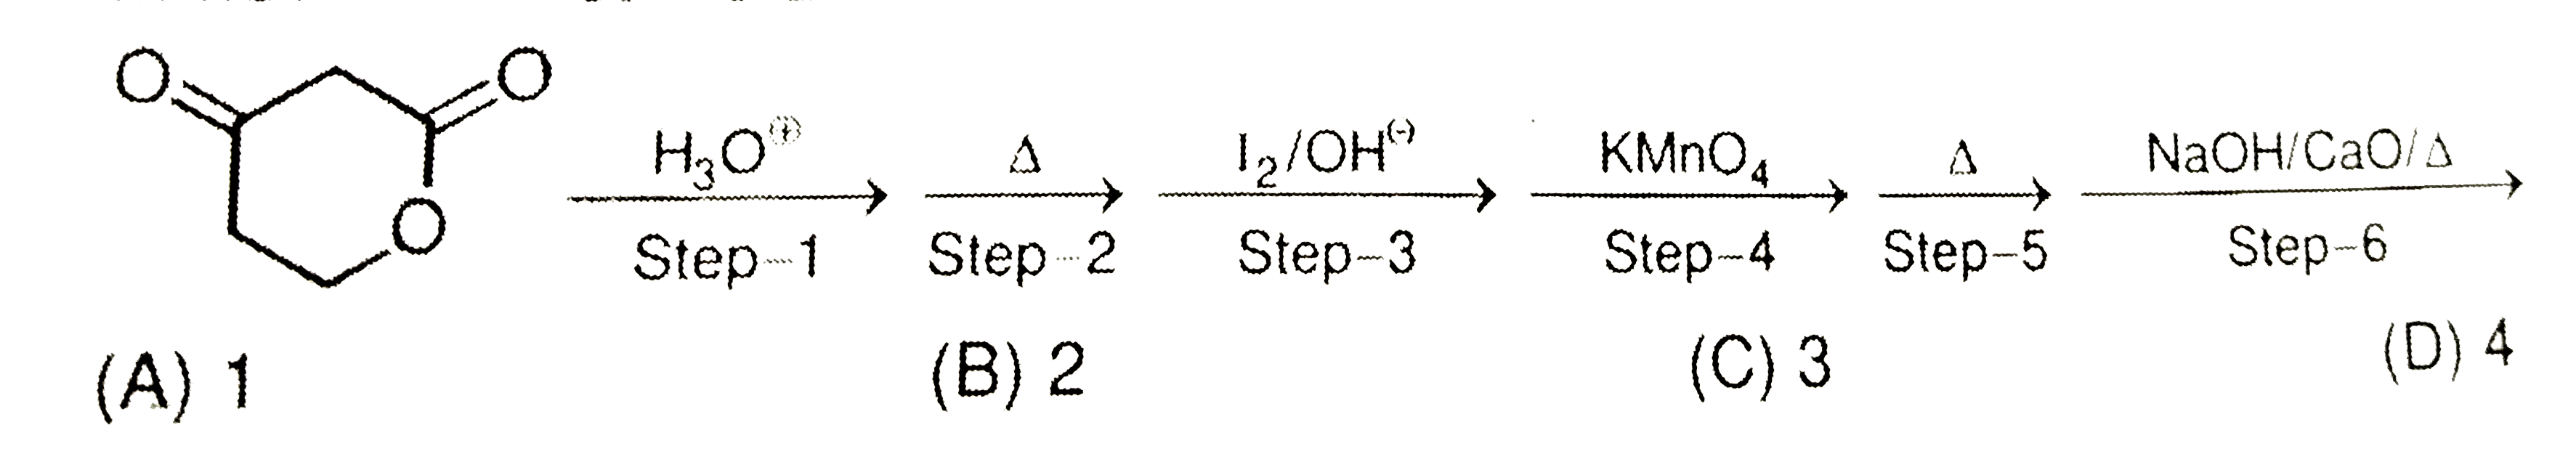 In how many steps decarboxylation reaction is taking place